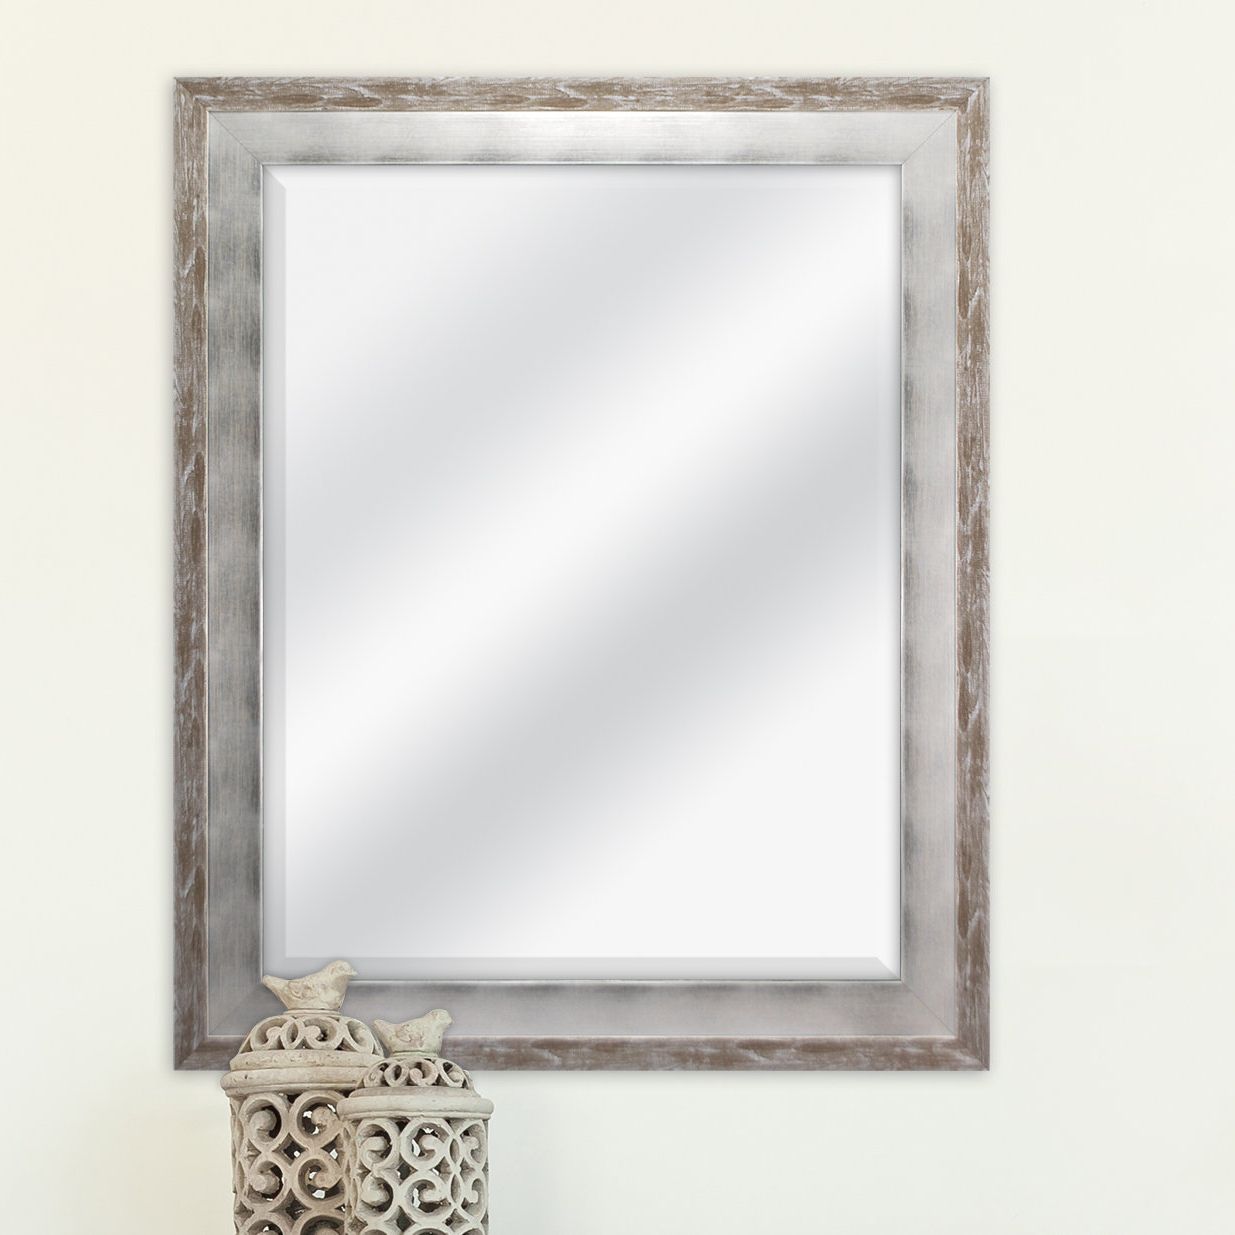 Best And Newest Epinal Shabby Elegance Wall Mirror Intended For Farmhouse Woodgrain And Leaf Accent Wall Mirrors (View 13 of 20)